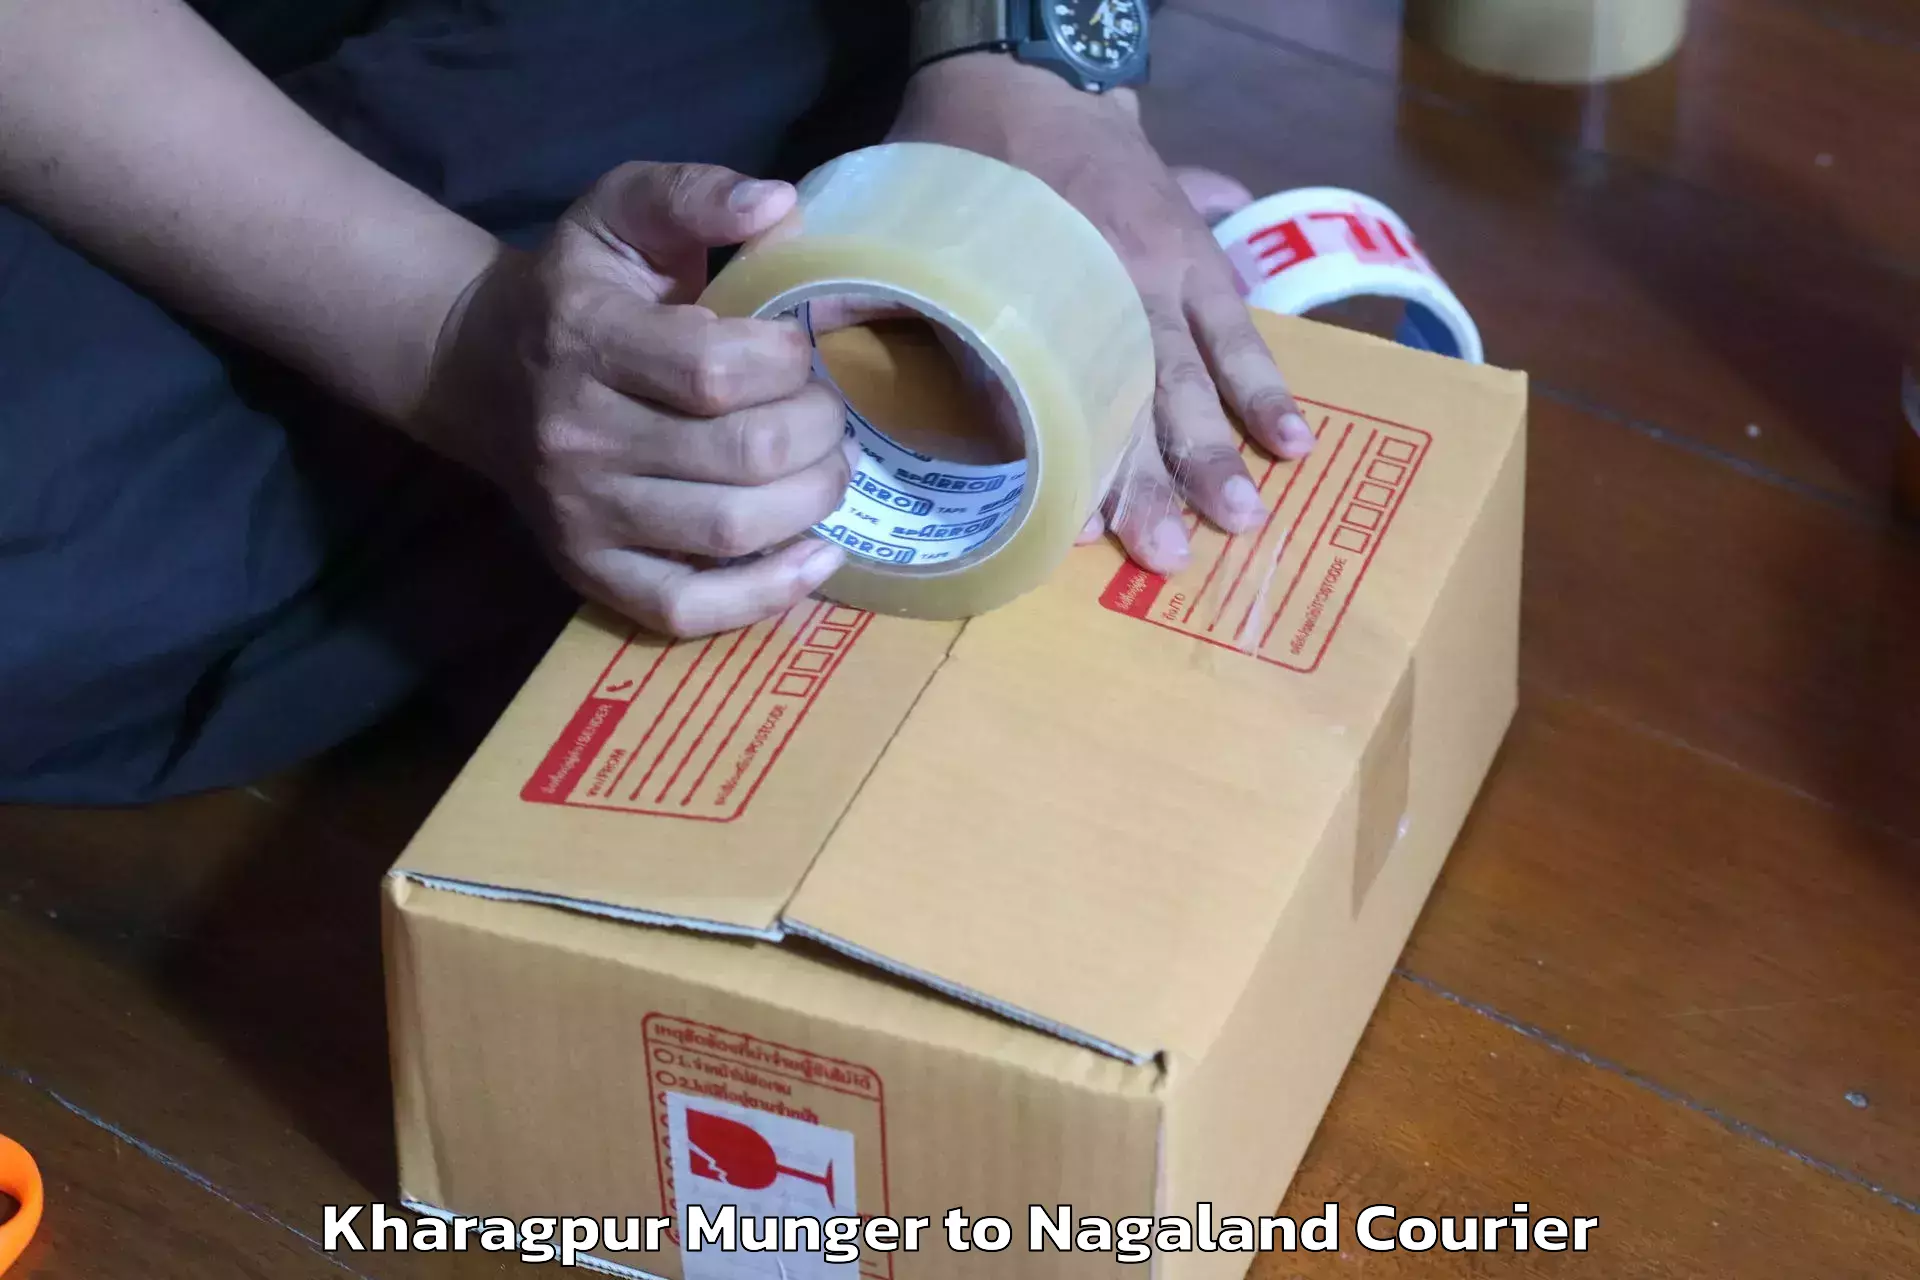 Quality relocation services Kharagpur Munger to Nagaland